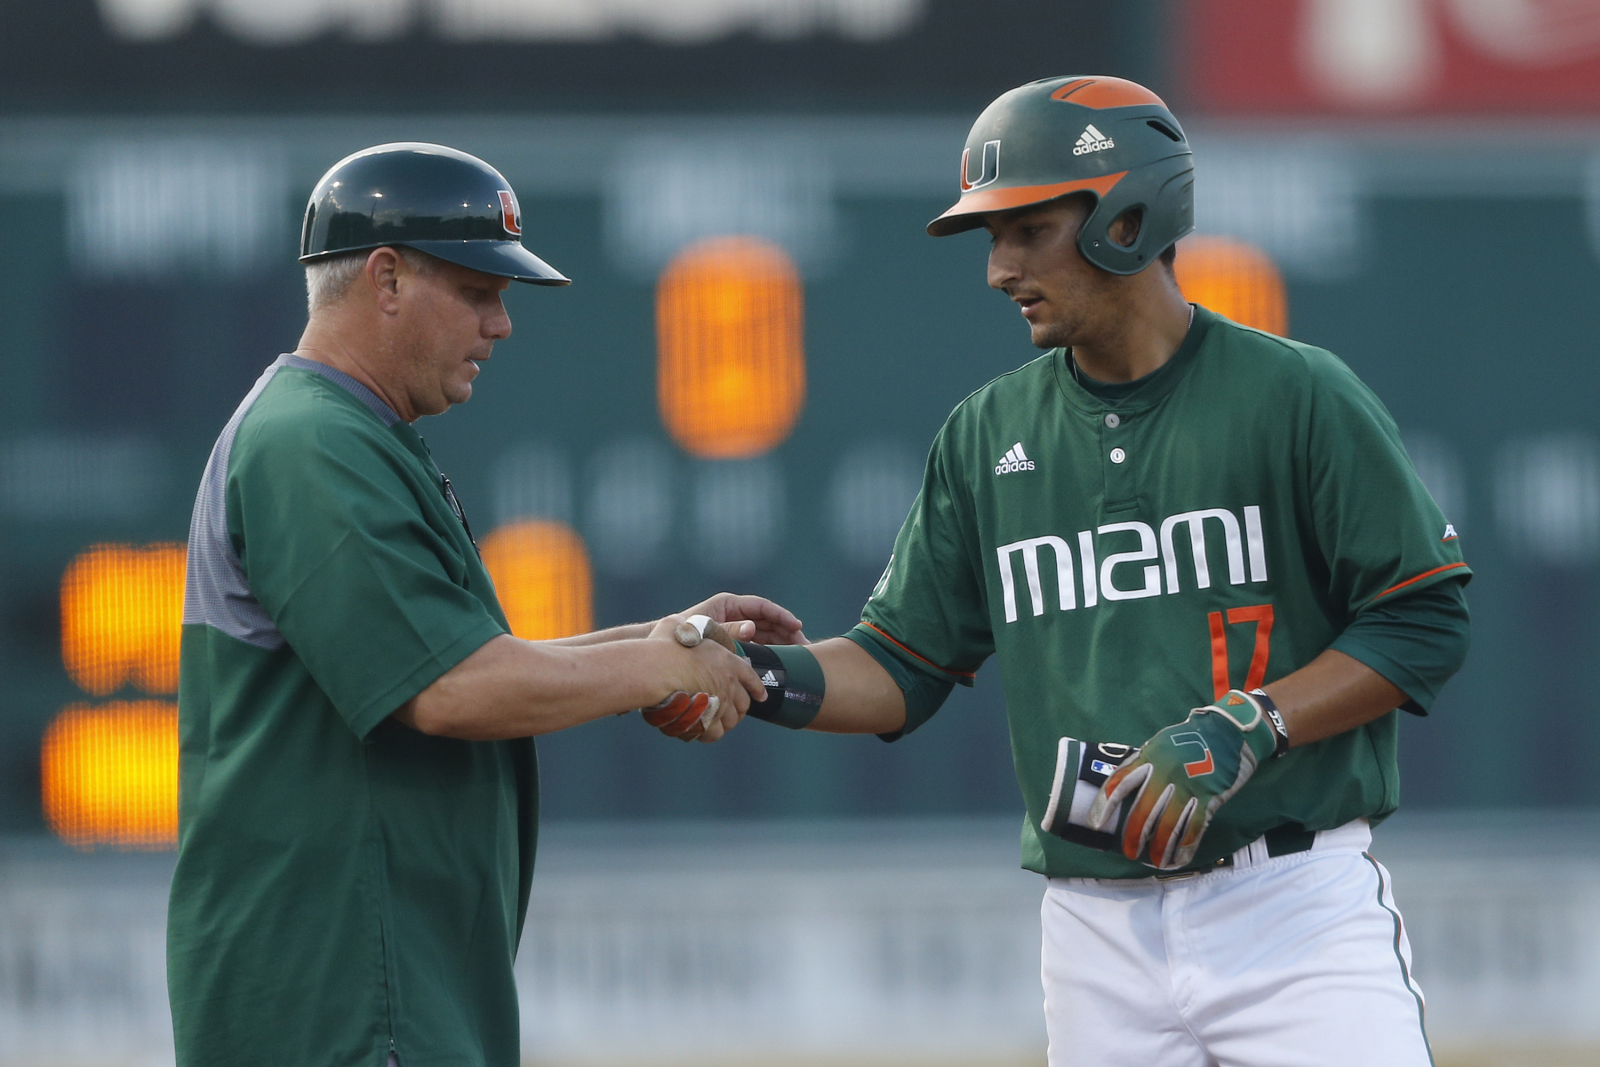 How to watch Miami baseball vs. South Alabama in NCAAs on TV